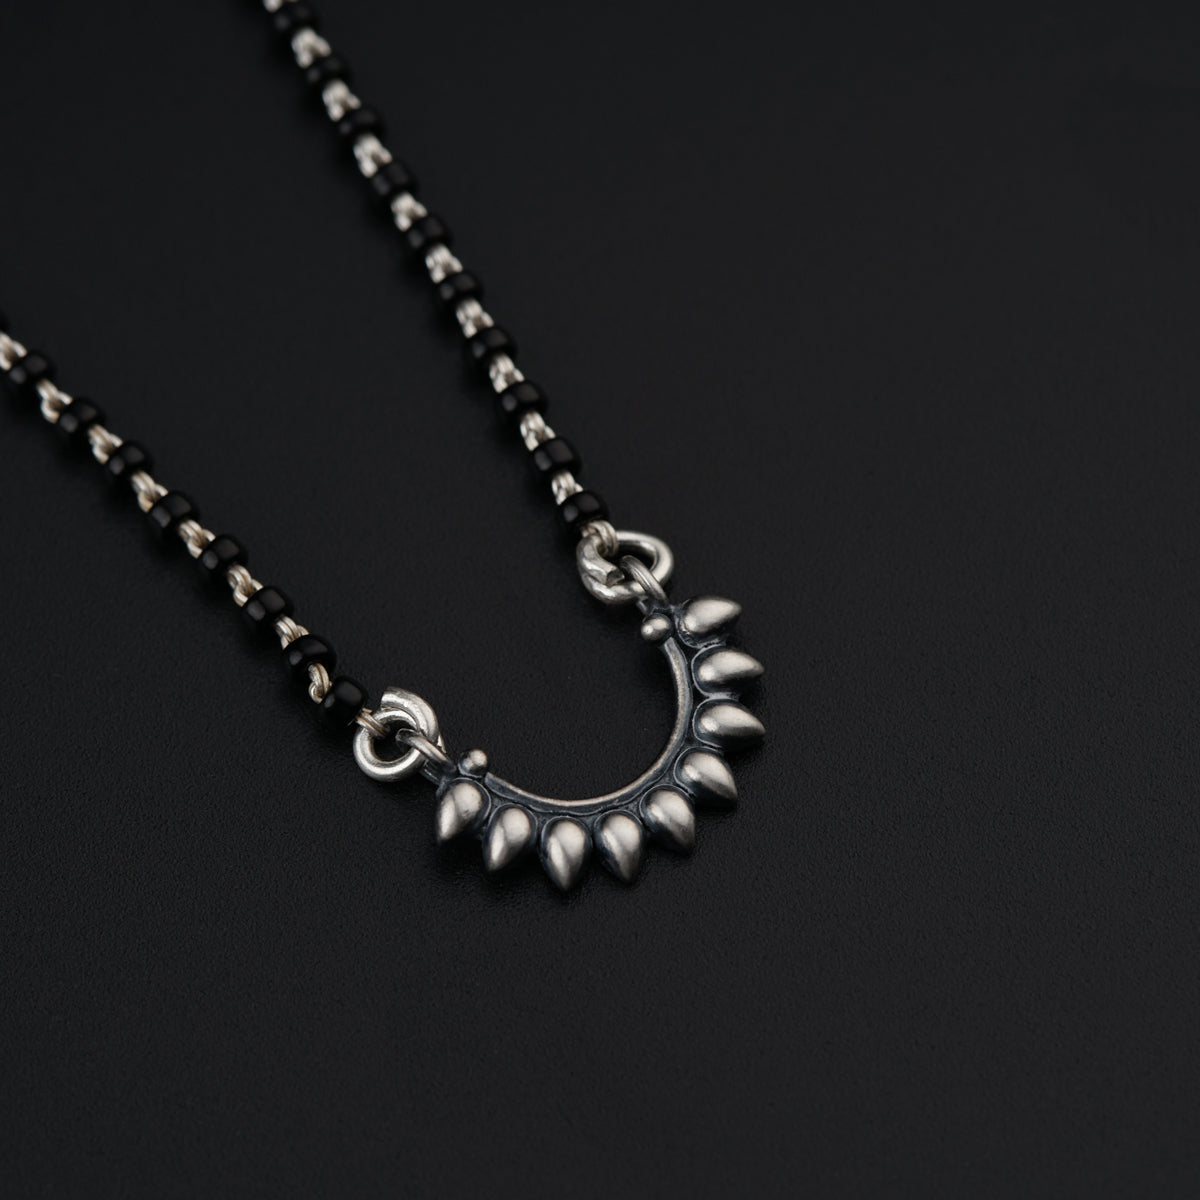 a silver necklace with spikes on a black background